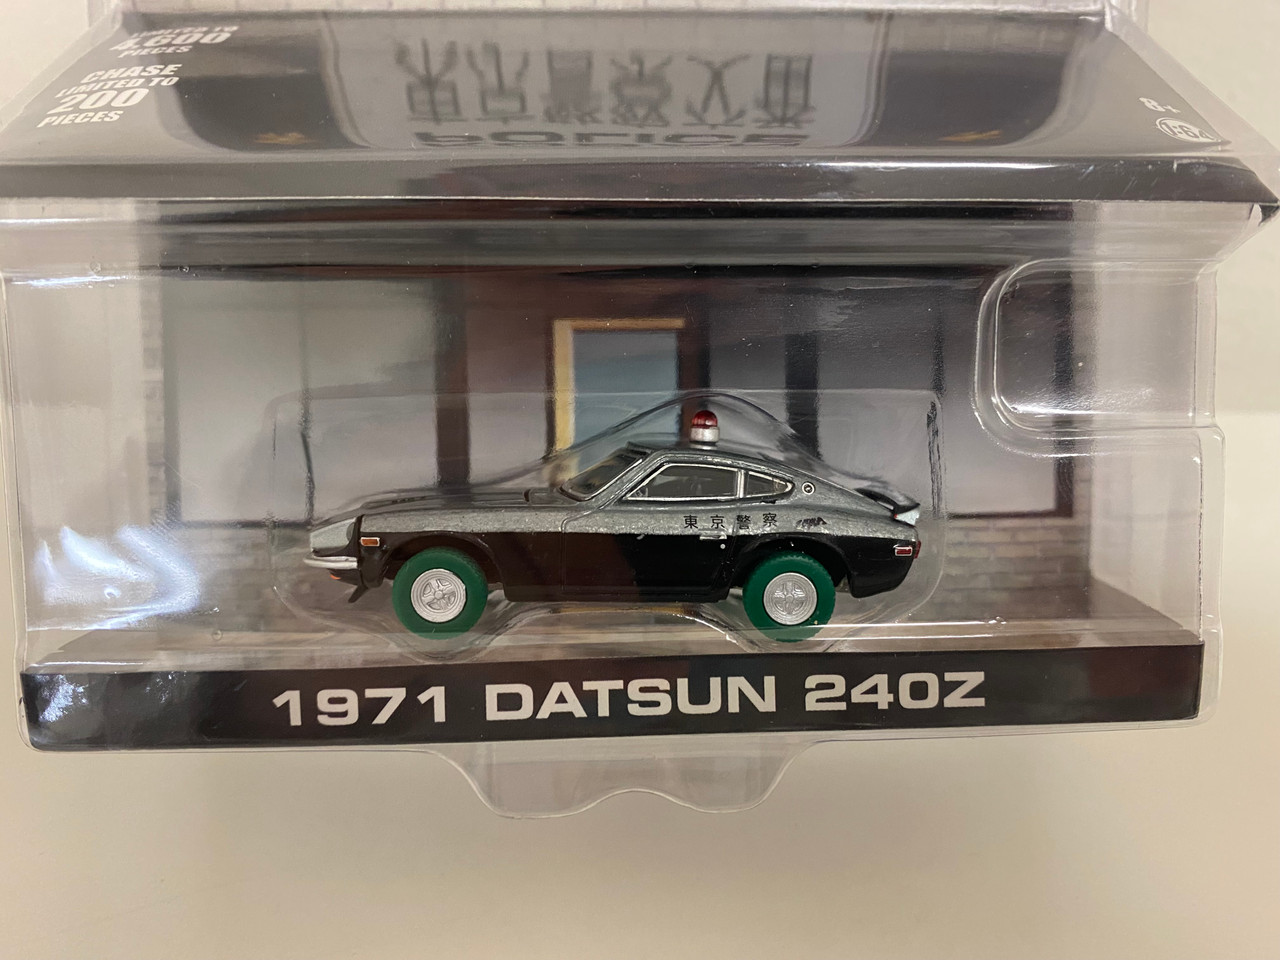 CHASE CAR 1971 Datsun 240Z Police Koban, Japan Limited Edition to 4,600 pieces Worldwide 1/64 Diecast Model Car by Greenlight